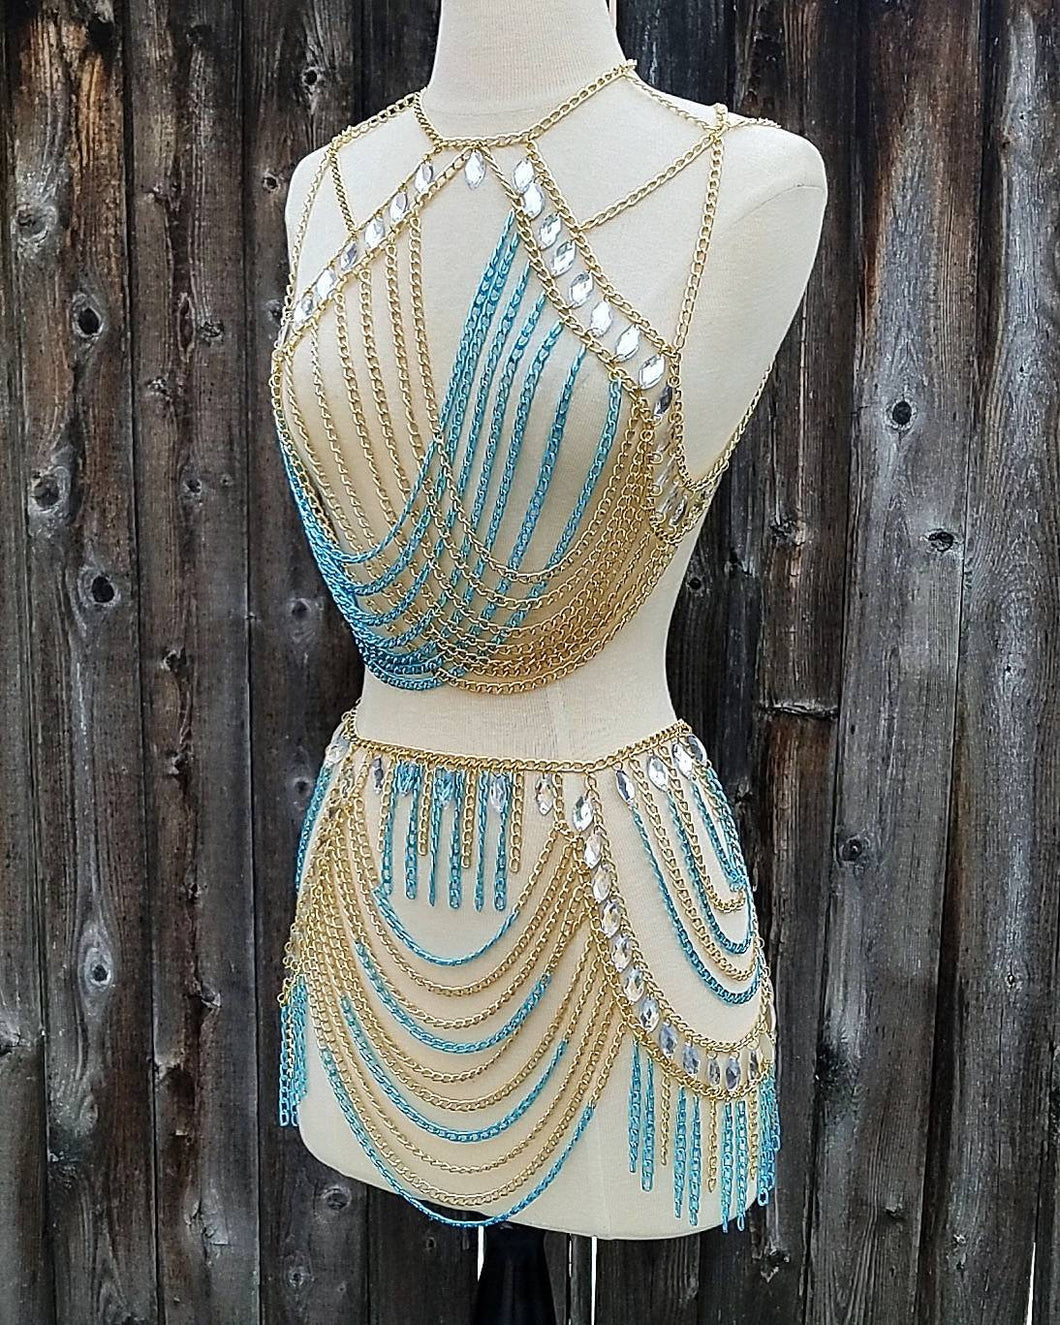 Jasmine Chain Crop Top and Skirt, Gold with Blue